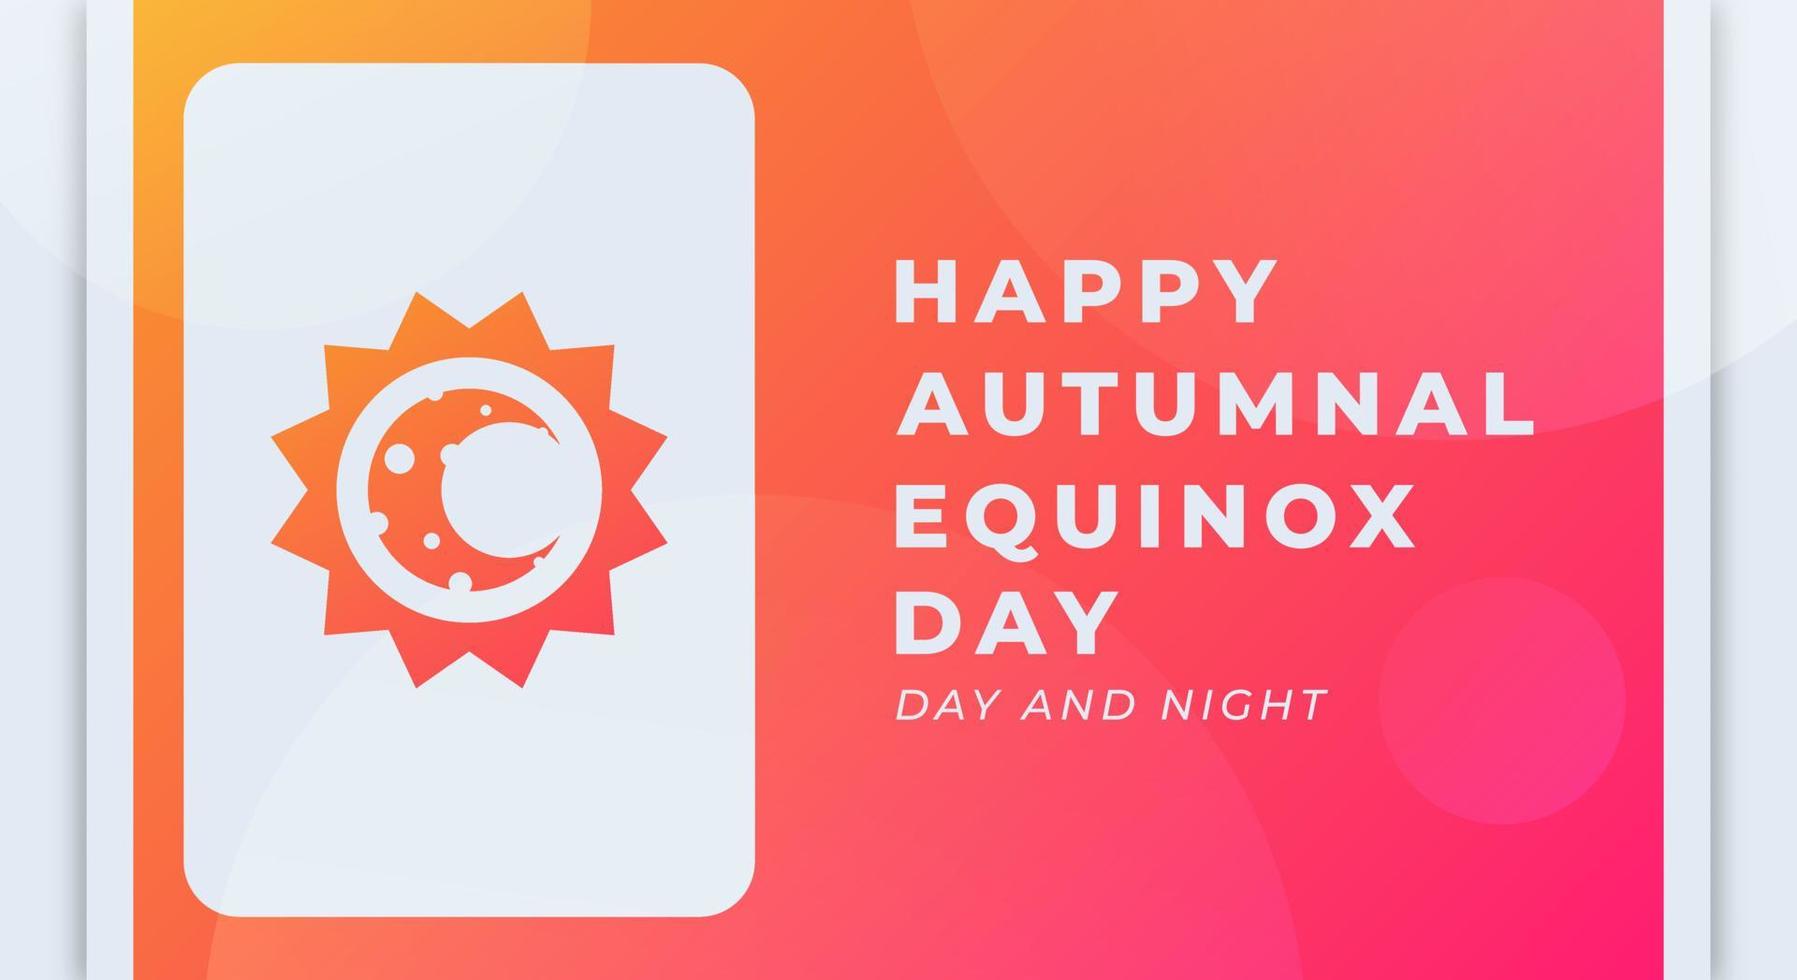 Happy Autumnal Equinox Day Celebration Vector Design Illustration. Template for Background, Poster, Banner, Advertising, Greeting Card or Print Design Element